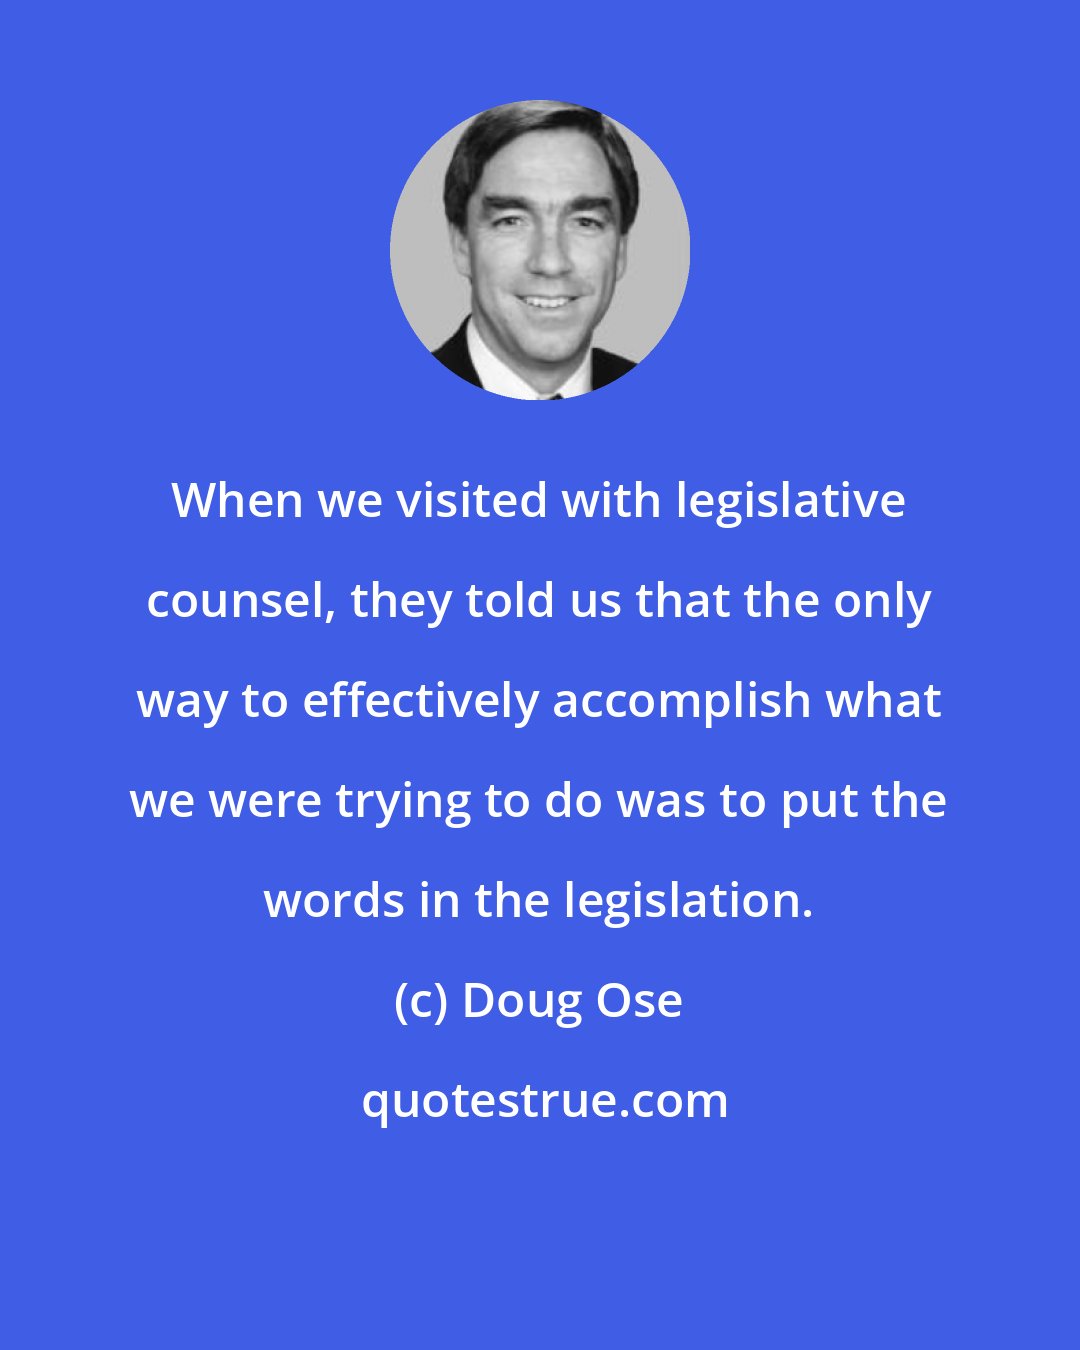 Doug Ose: When we visited with legislative counsel, they told us that the only way to effectively accomplish what we were trying to do was to put the words in the legislation.